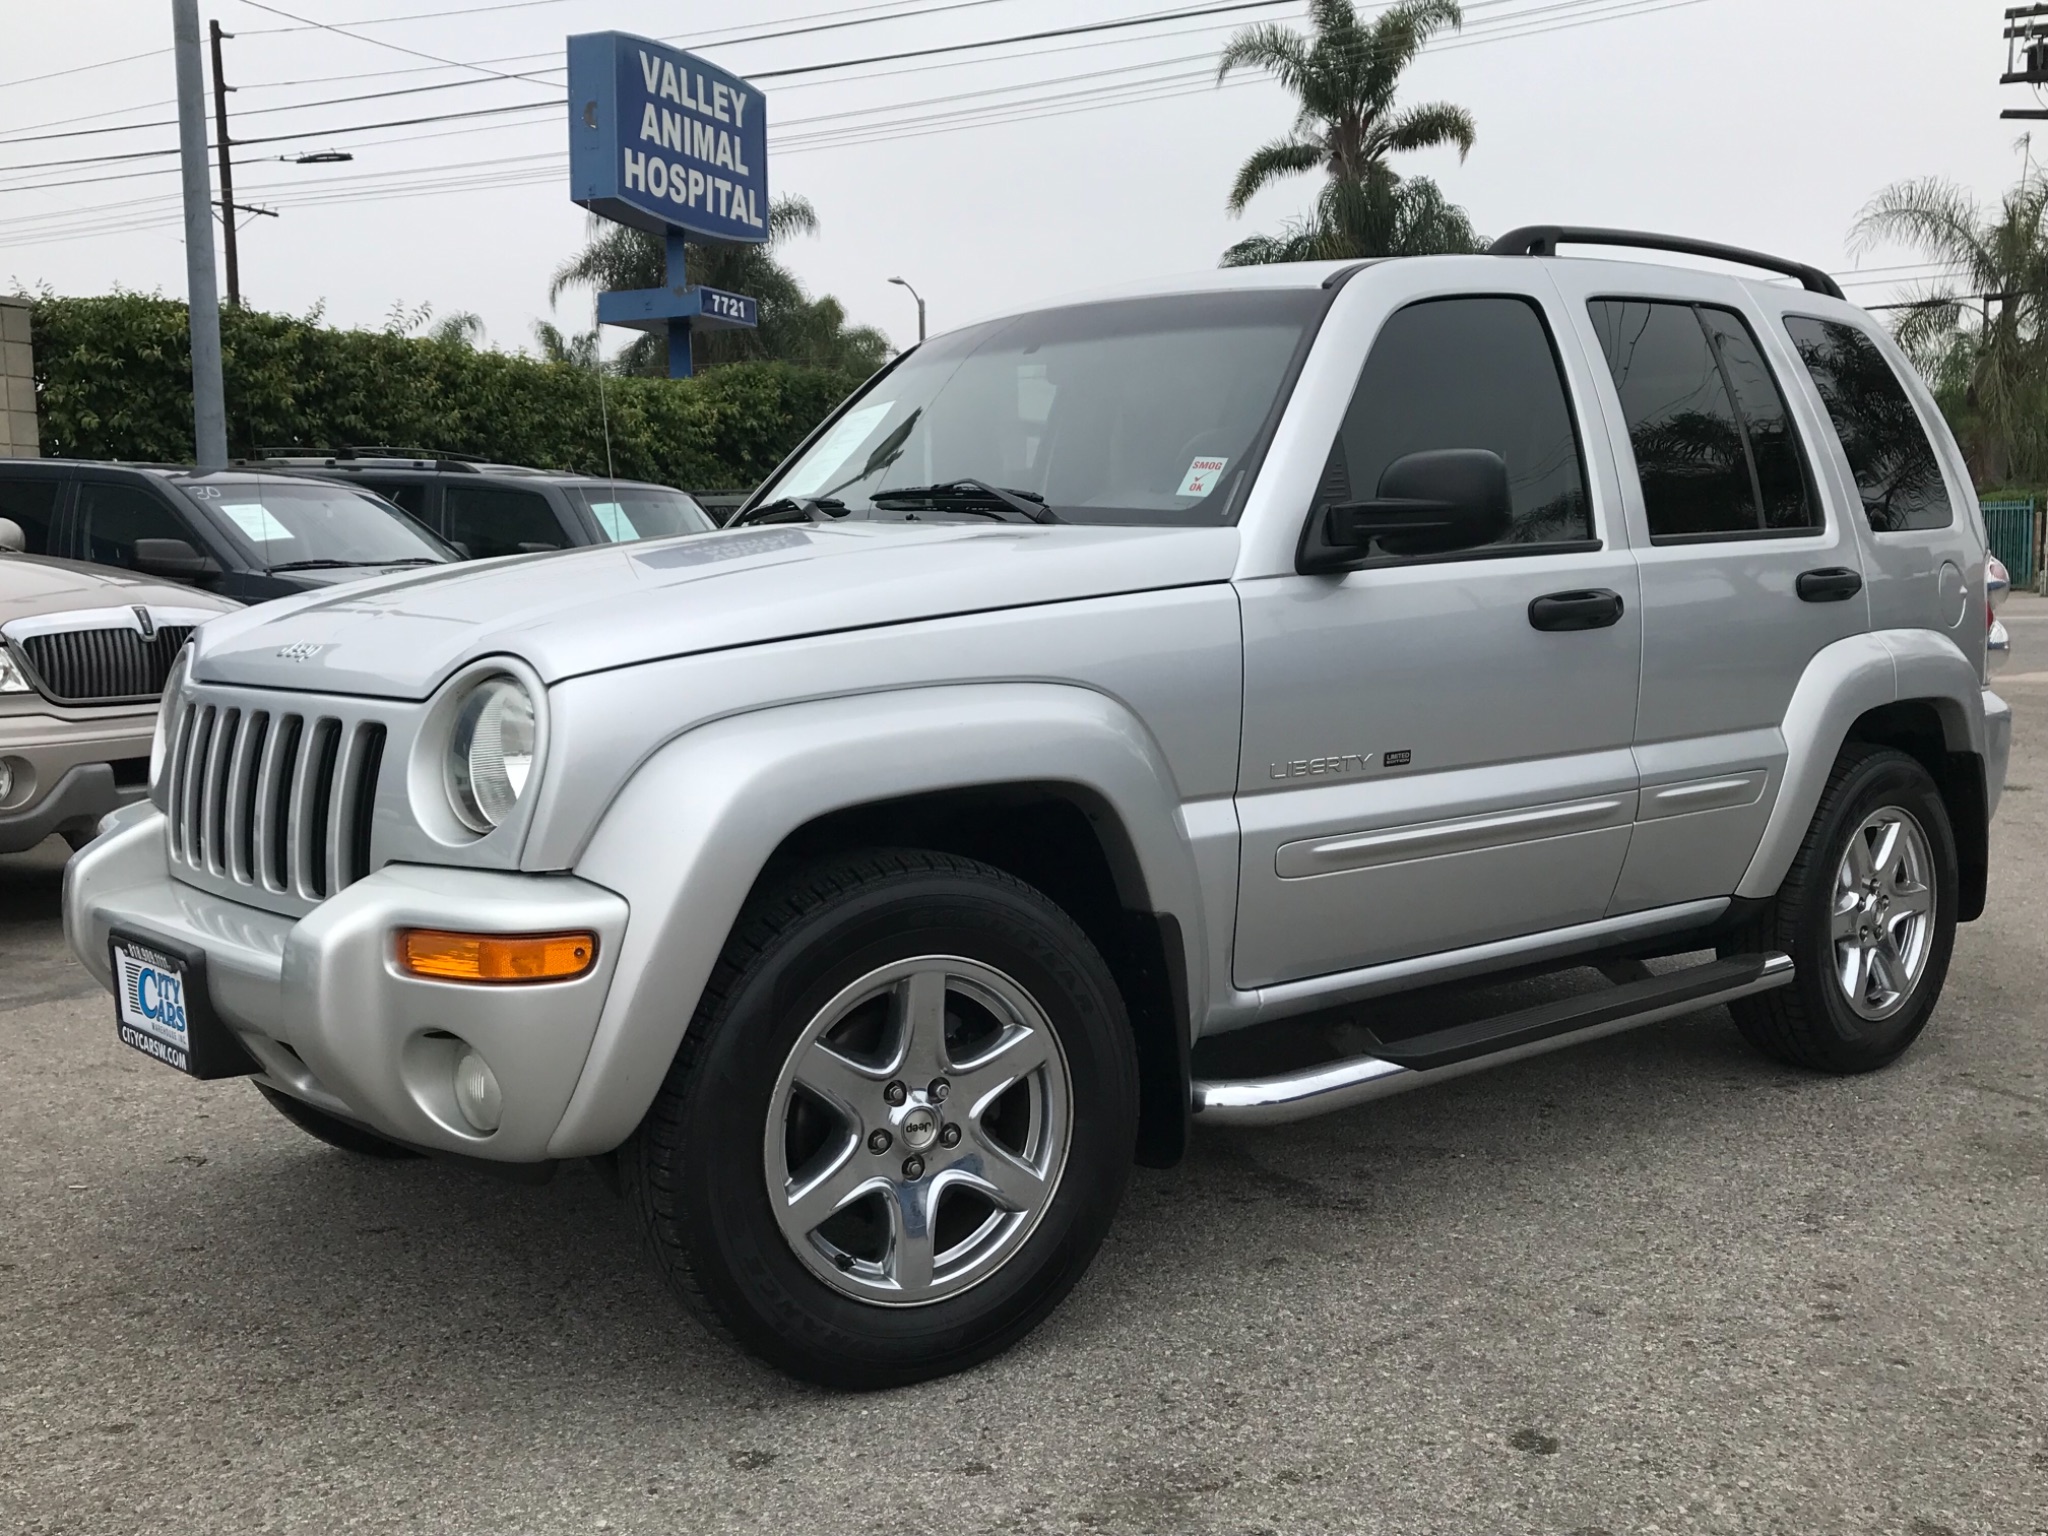 Used 2003 Jeep Liberty Limited at City Cars Warehouse INC